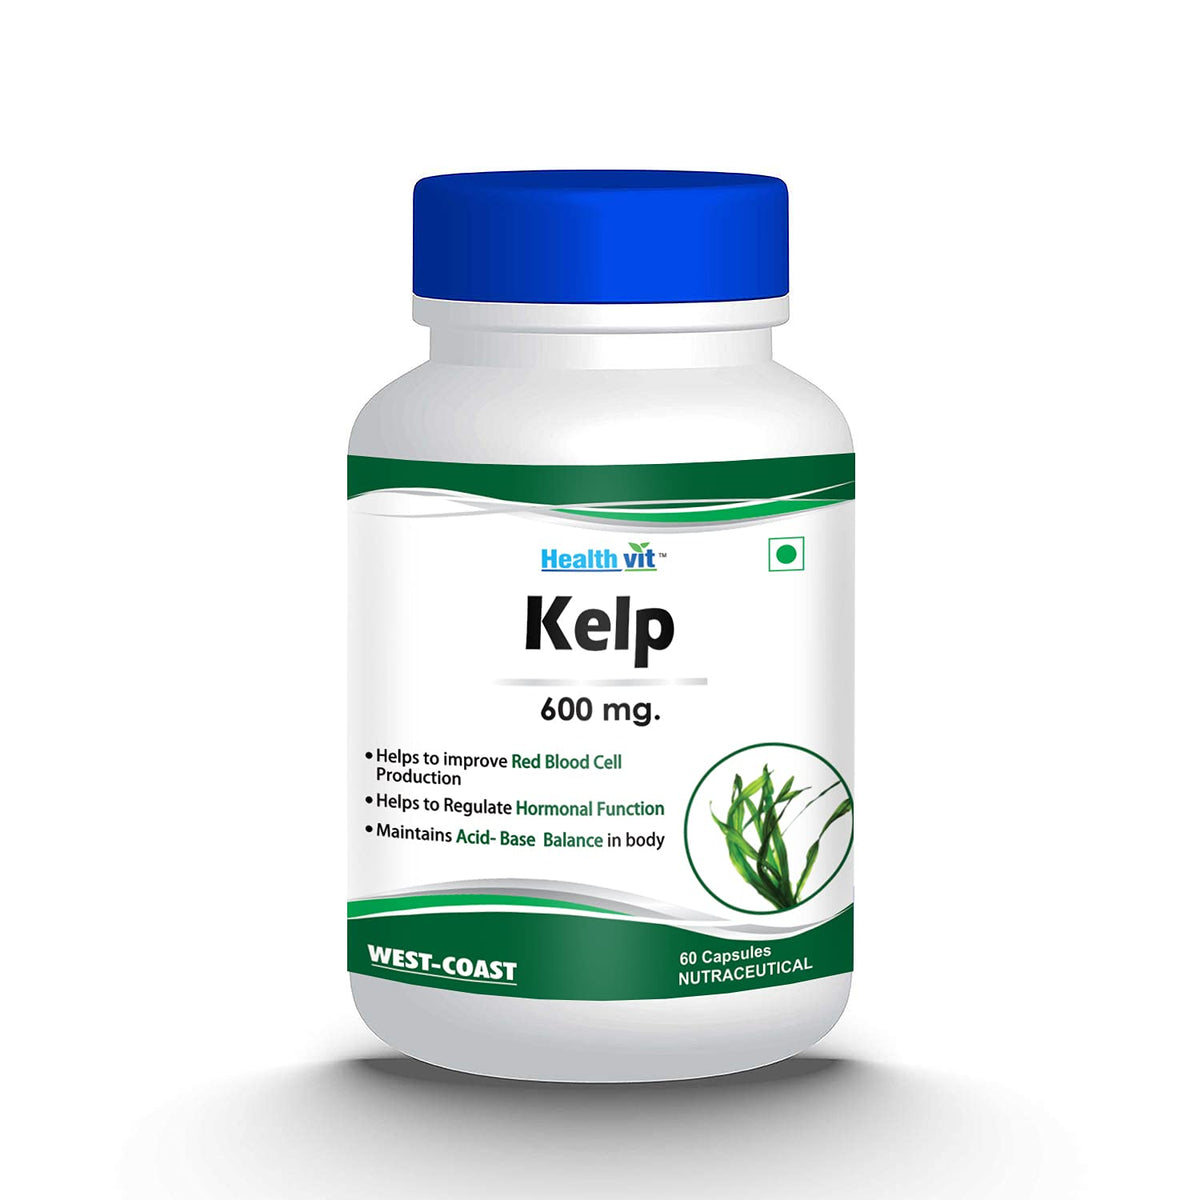 Healthvit Sea Kelp Capsules - 600 mg, 60 Veg Capsules | Good for Skin Care and Weight Loss | Rich in Antioxidants, Fiber and Proteins | Natural Source of Iodine | Improves Red Blood Cells production